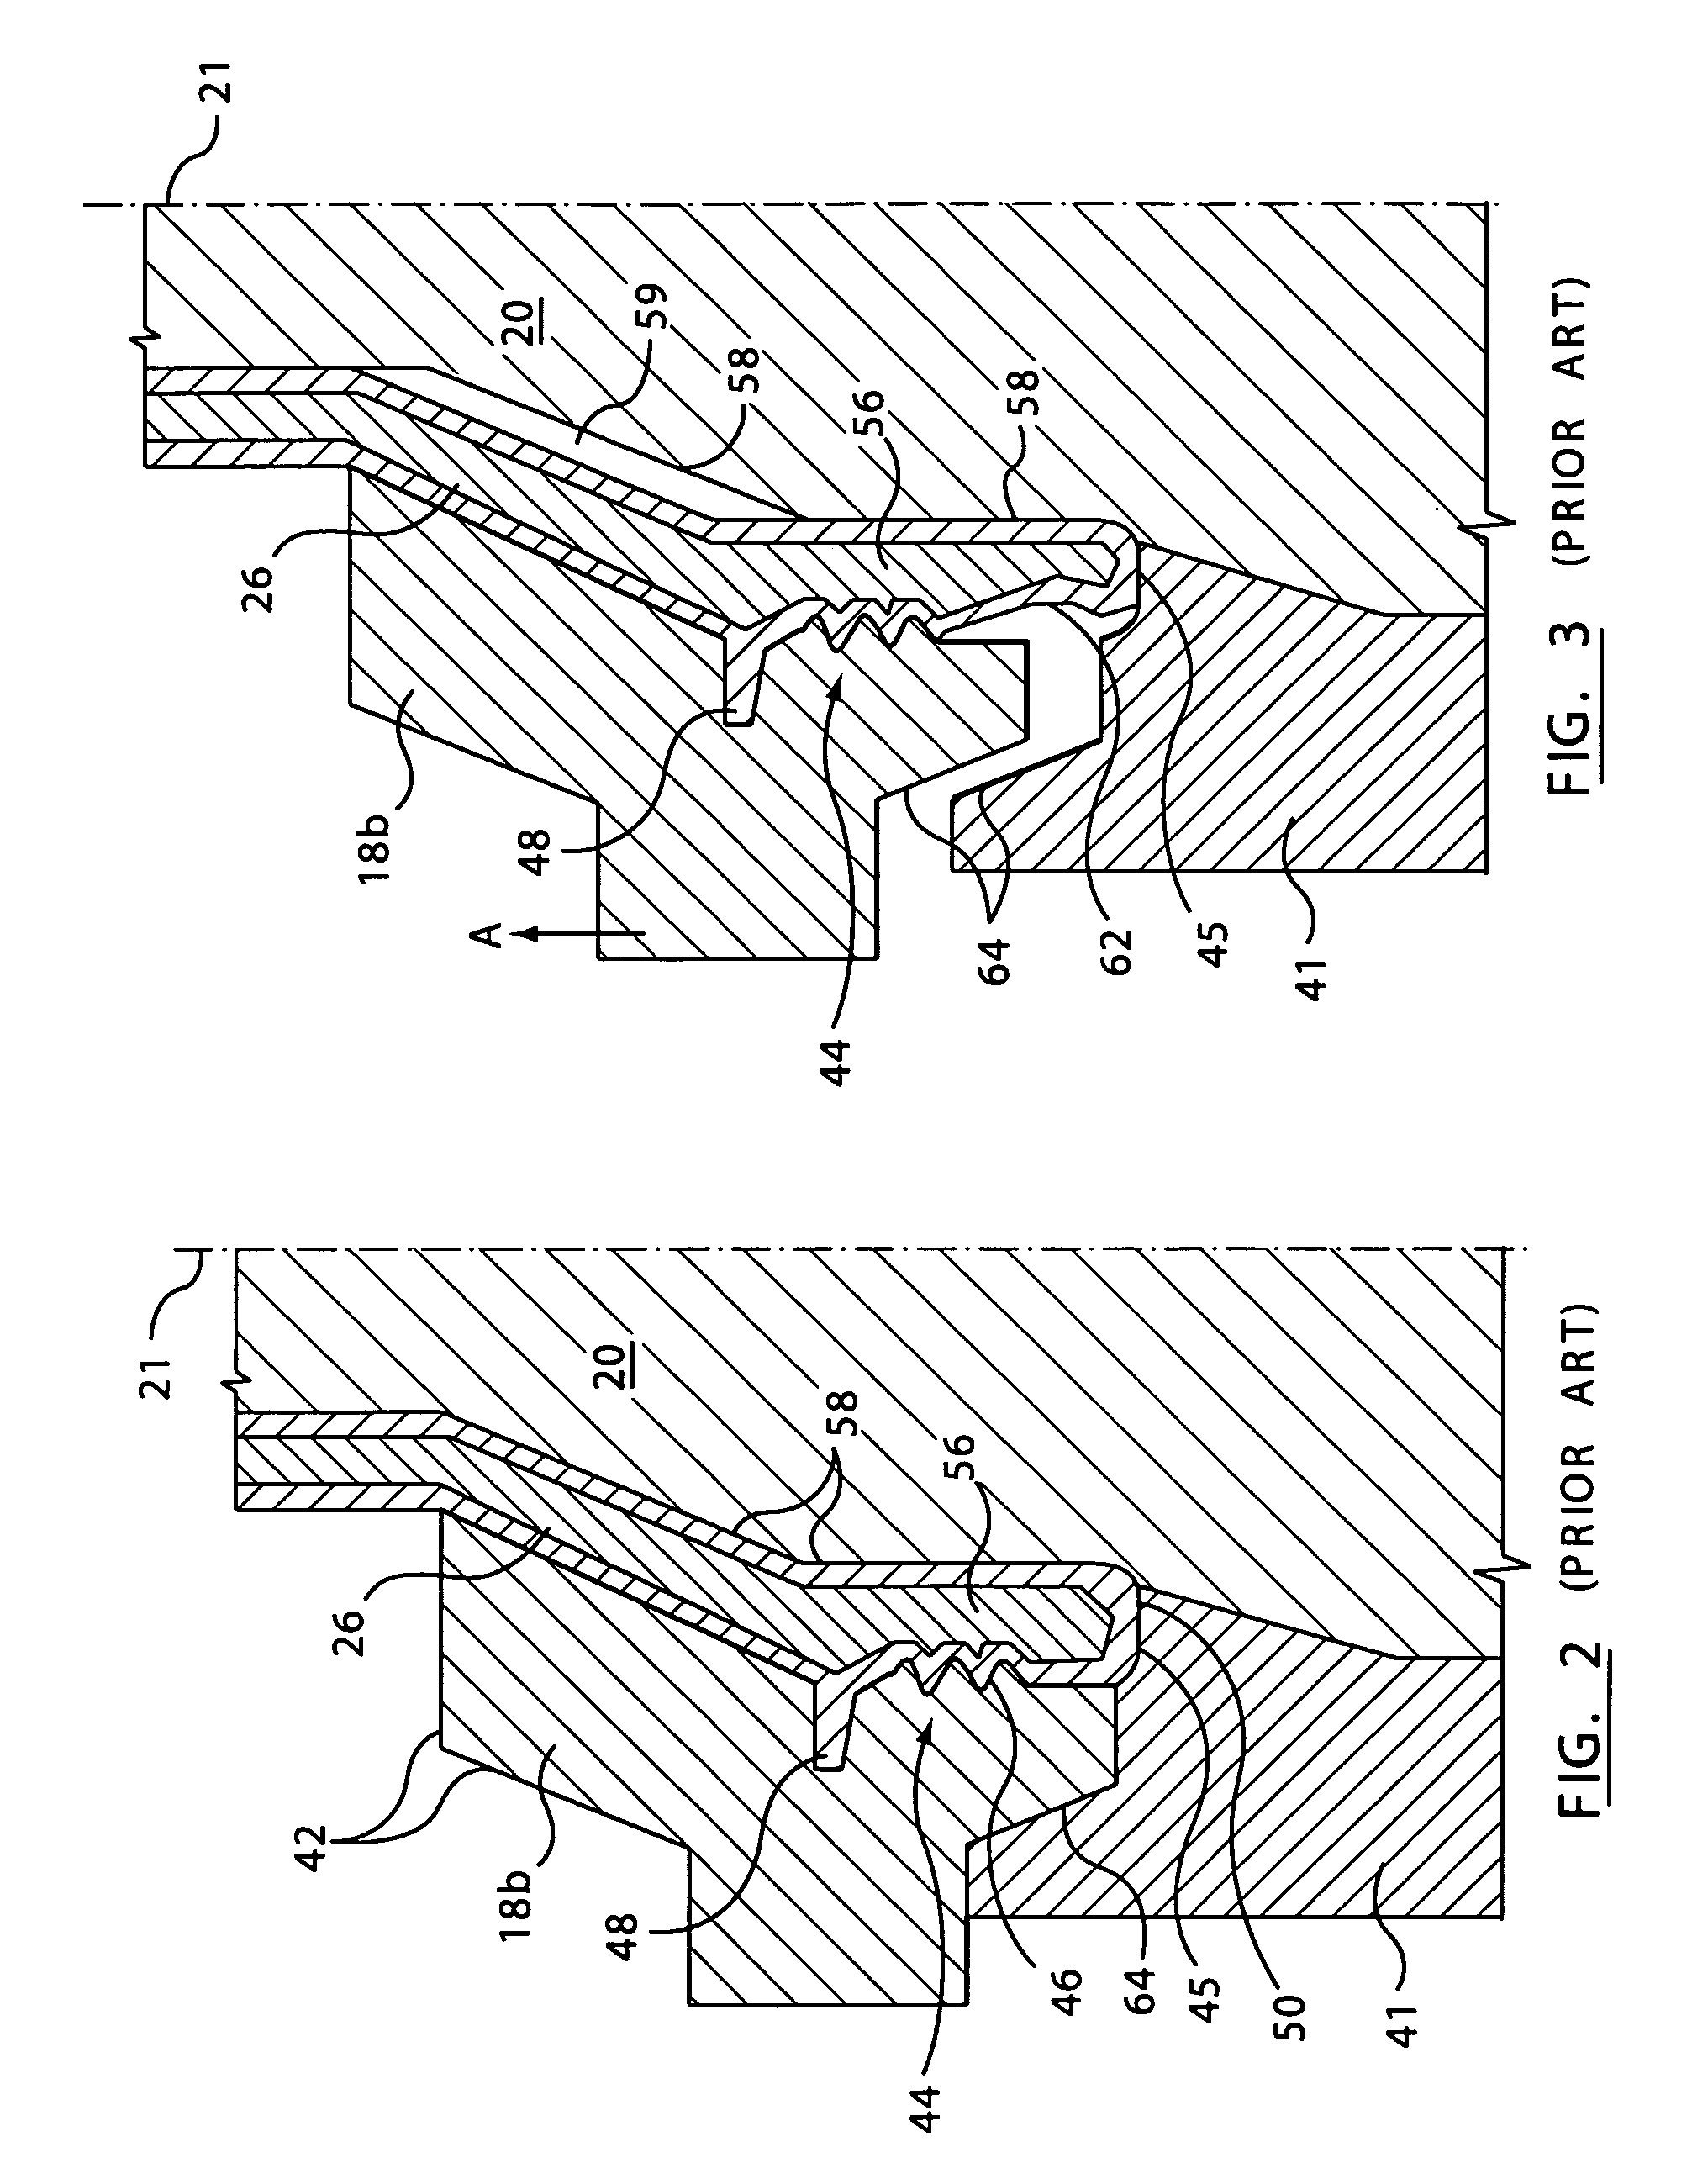 Apparatus and method for removing a molded article from a mold